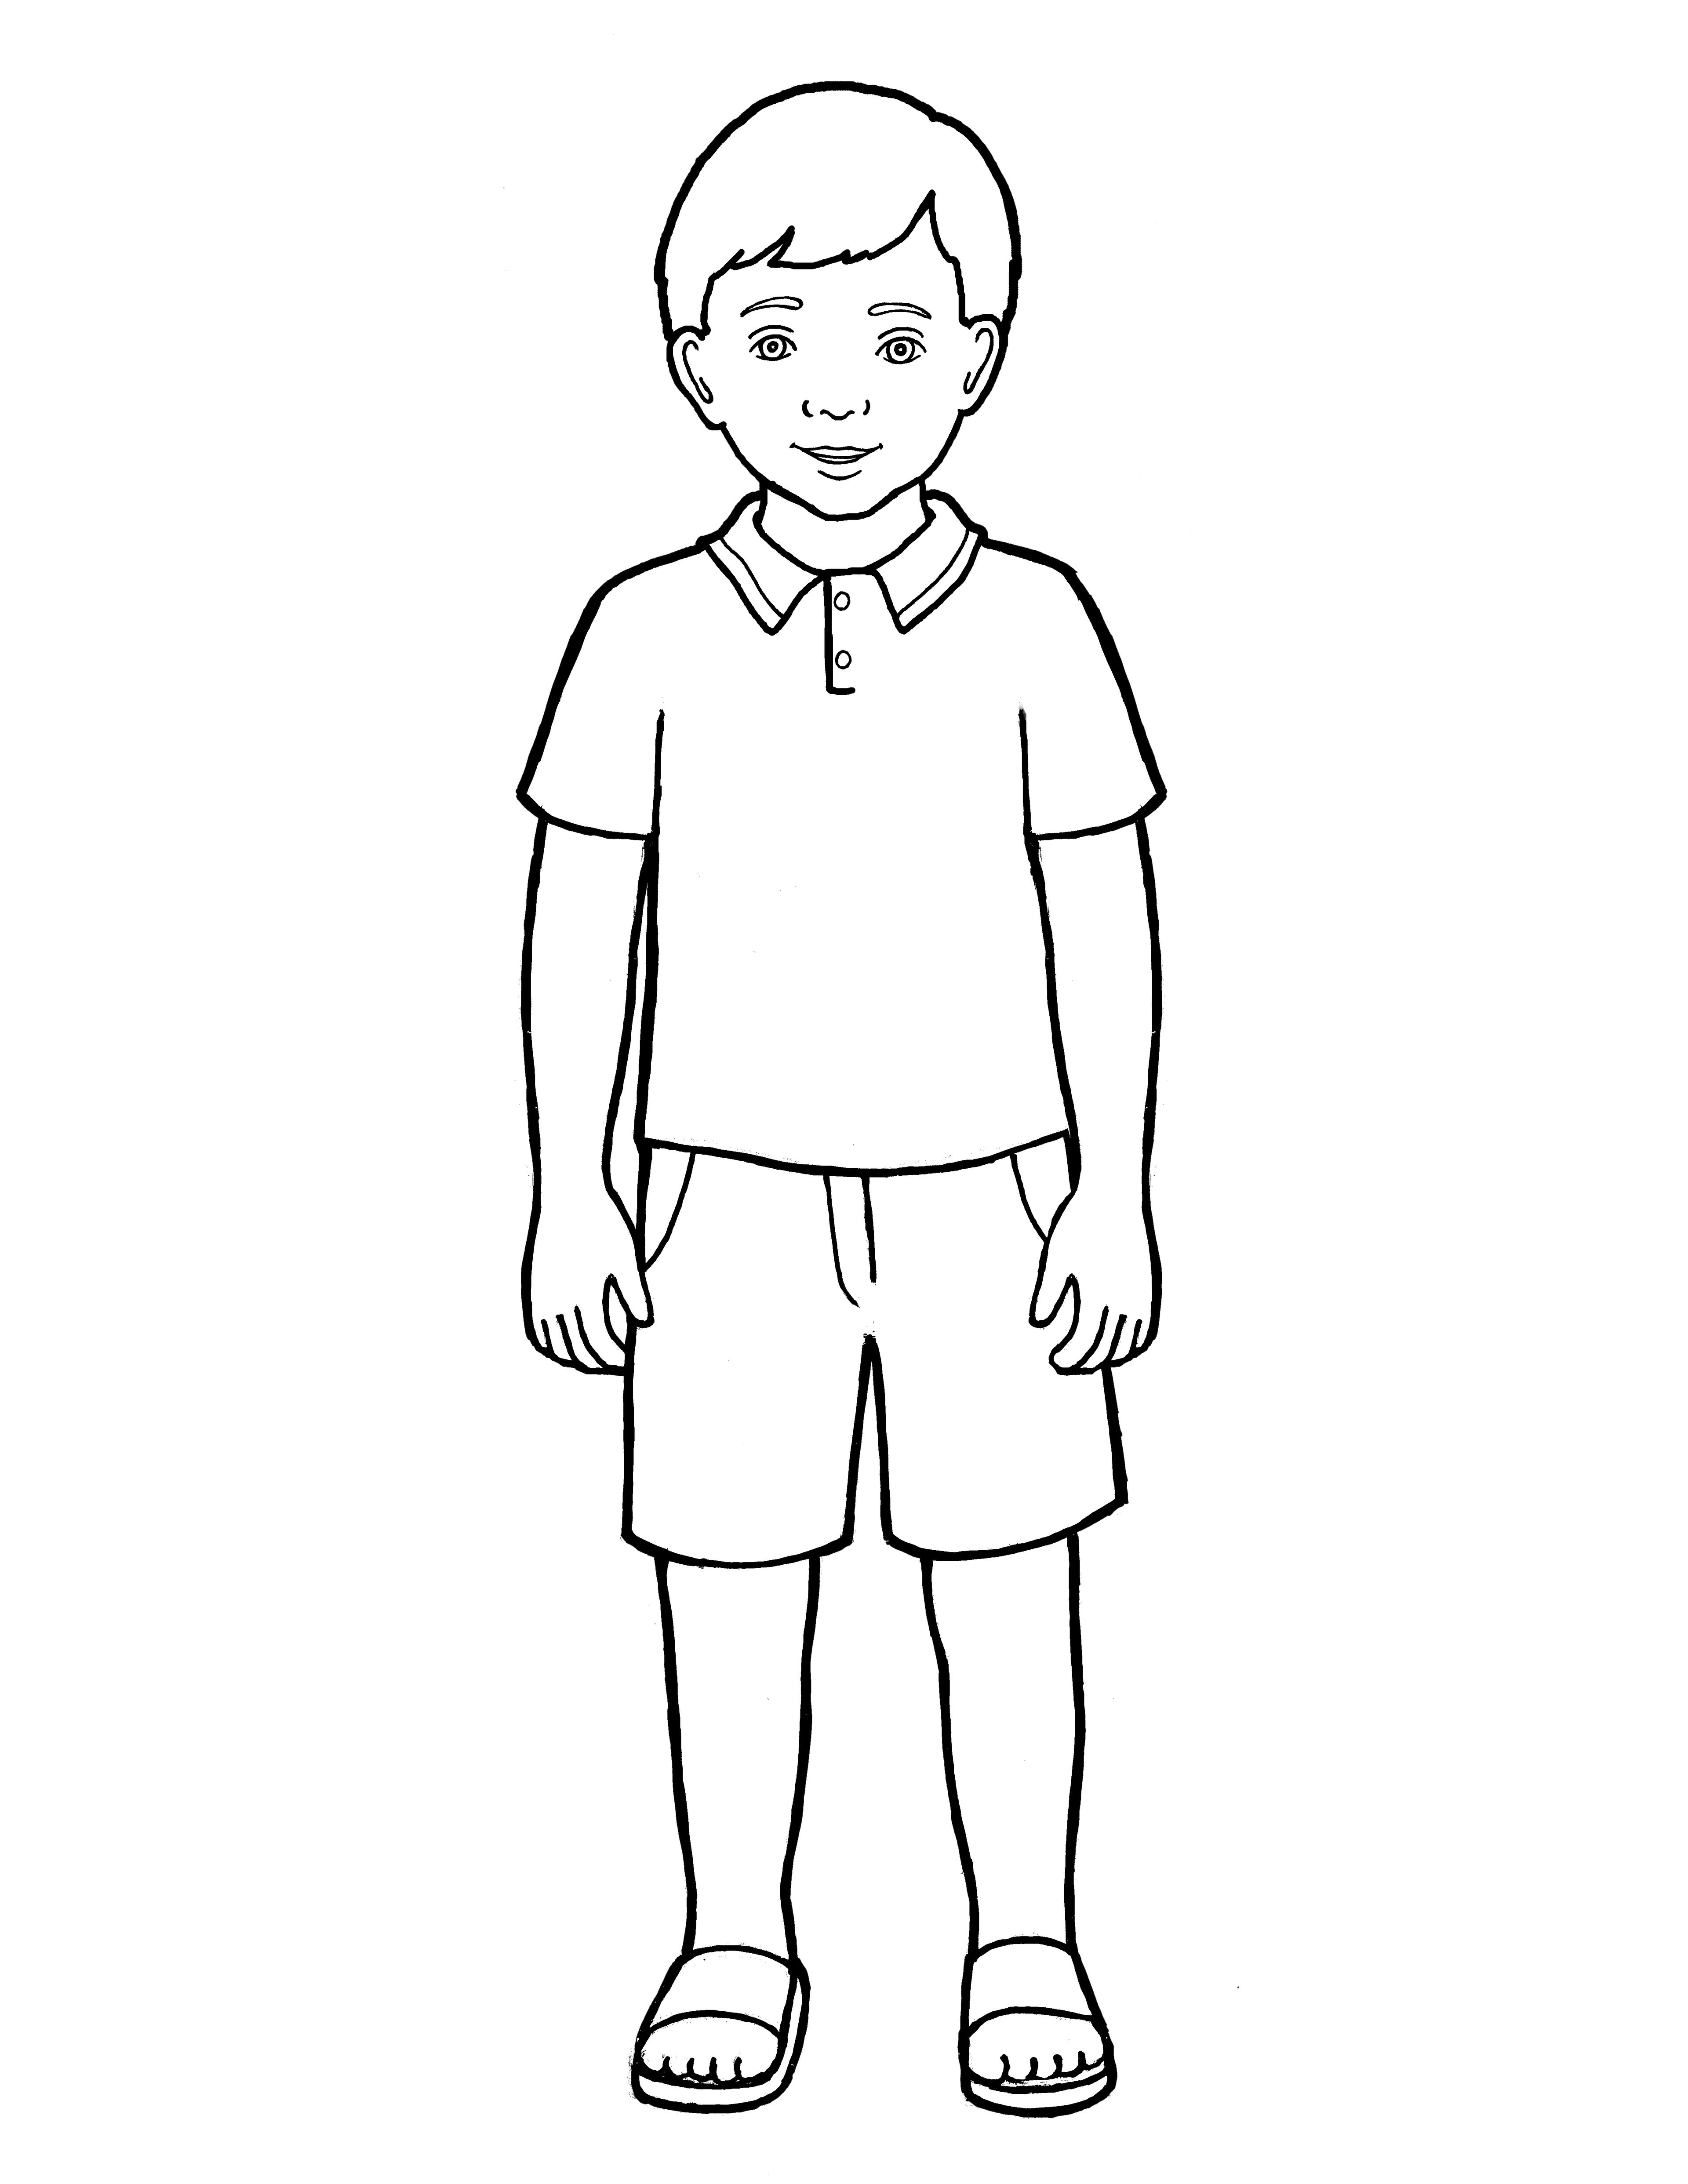 An illustration of a Primary-age boy standing, from the nursery manual Behold Your Little Ones (2008), page 43.